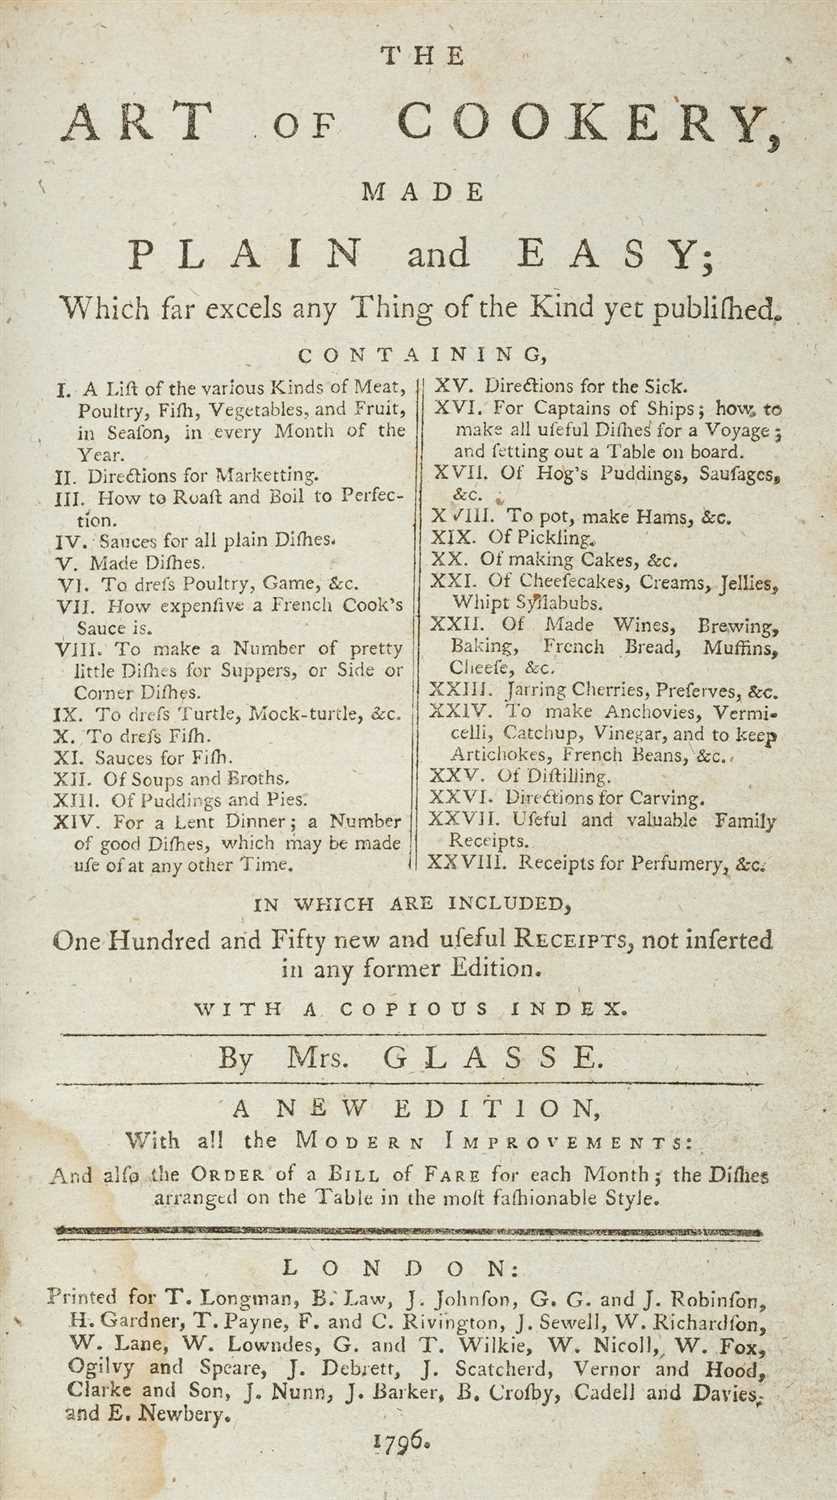 Lot 321 - Glasse (Hannah). The Art of Cookery, 1796